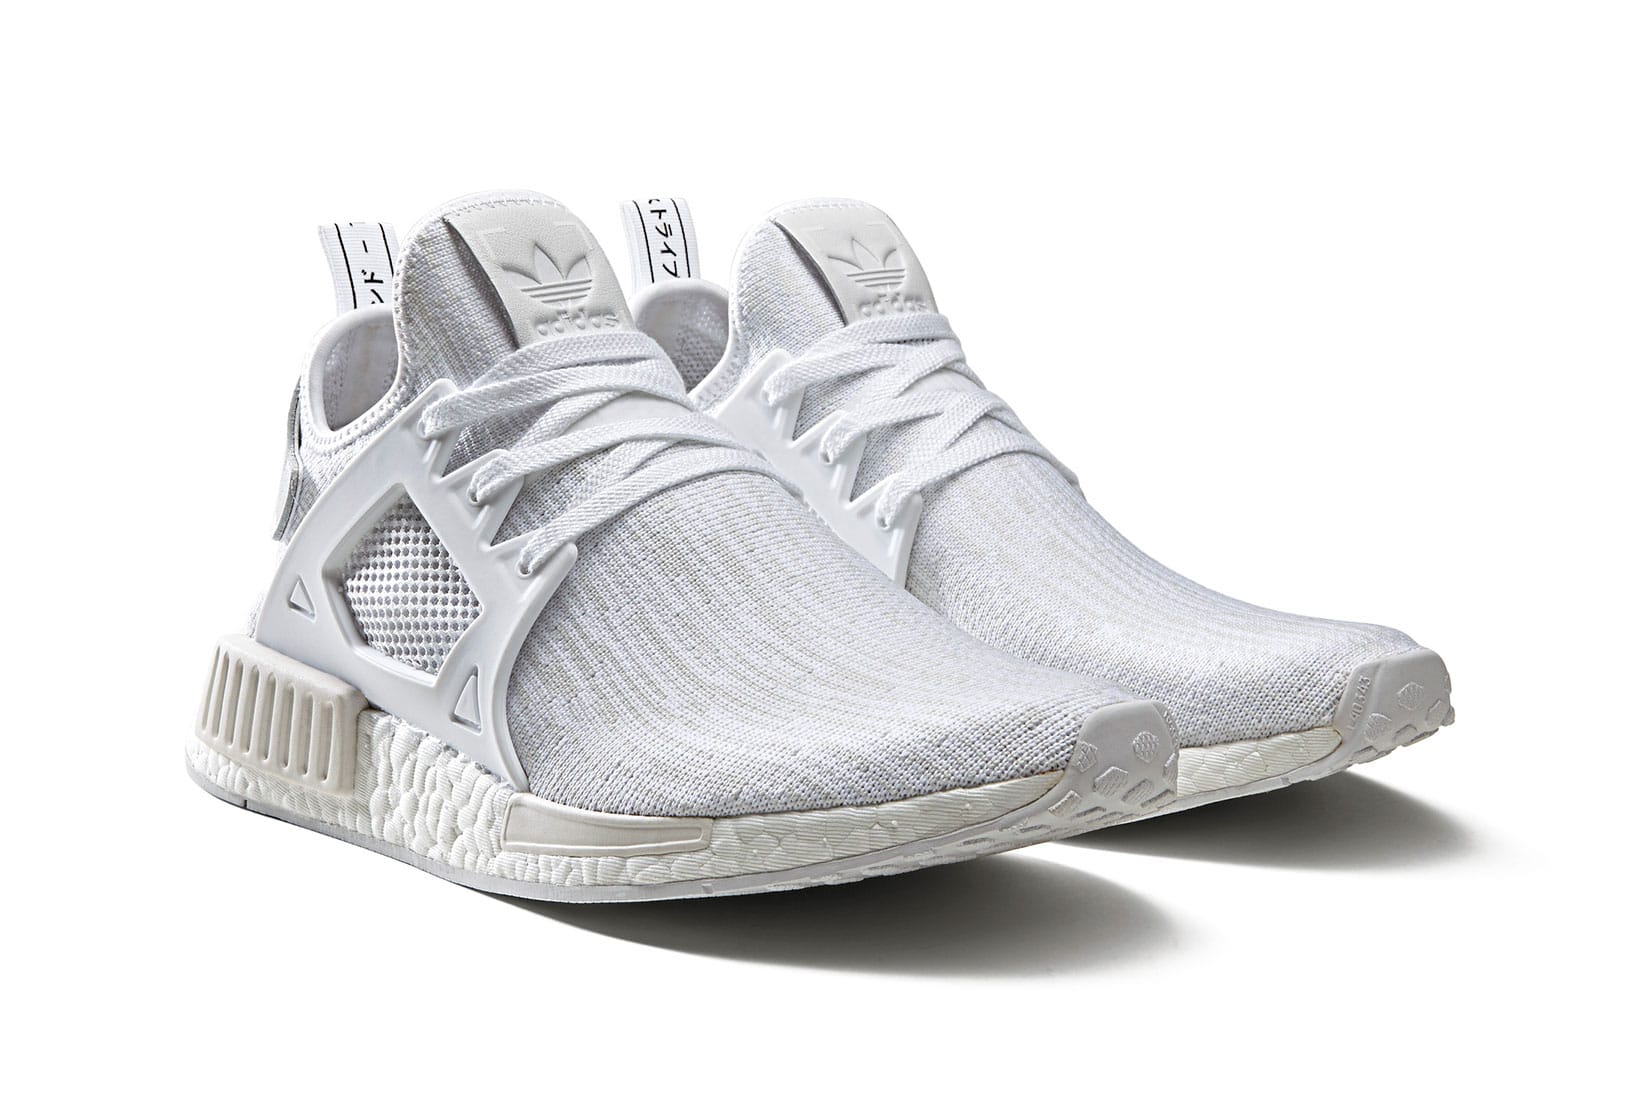 adidas nmd xr1 white and black